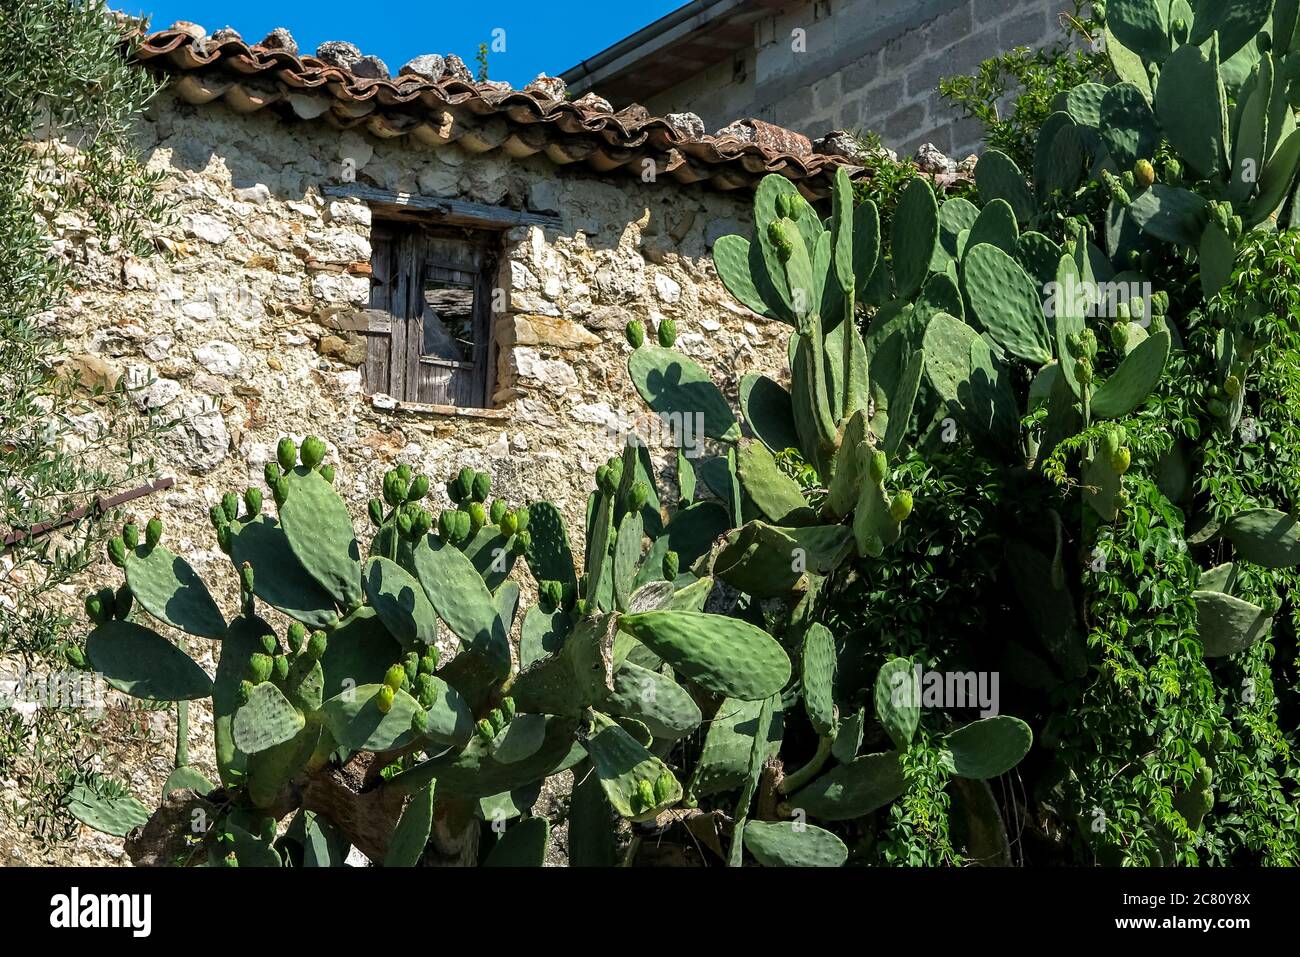 Detail of house with small wooden window and stone walls with cactus palm garden (Opuntia ficus-indica), commune of Lenola, province of Latina, Italy Stock Photo